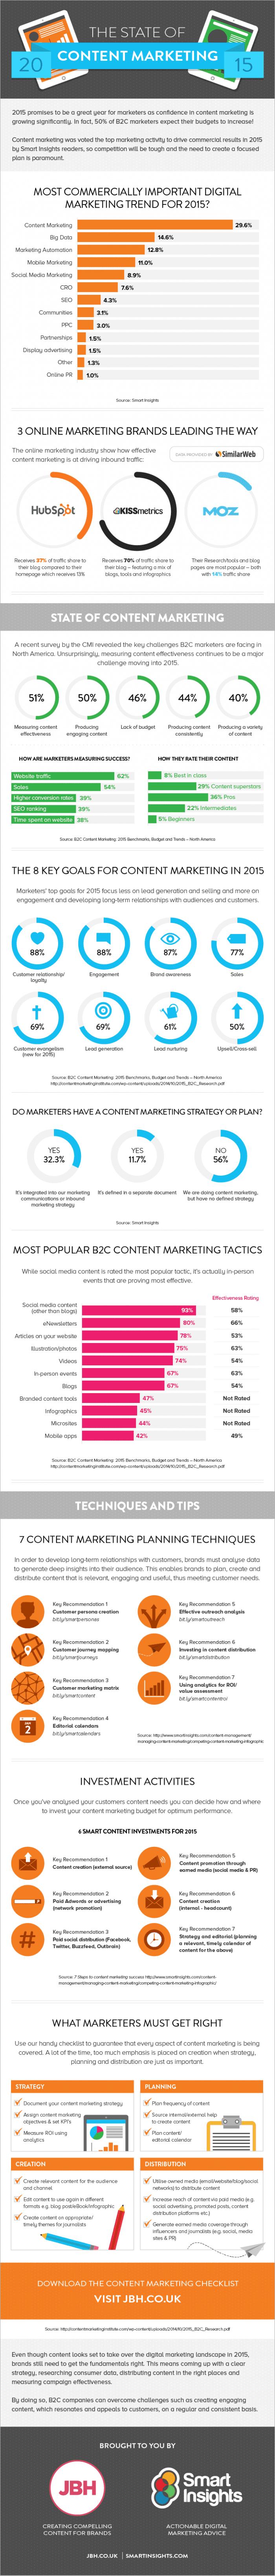 State of Content Marketing 2015